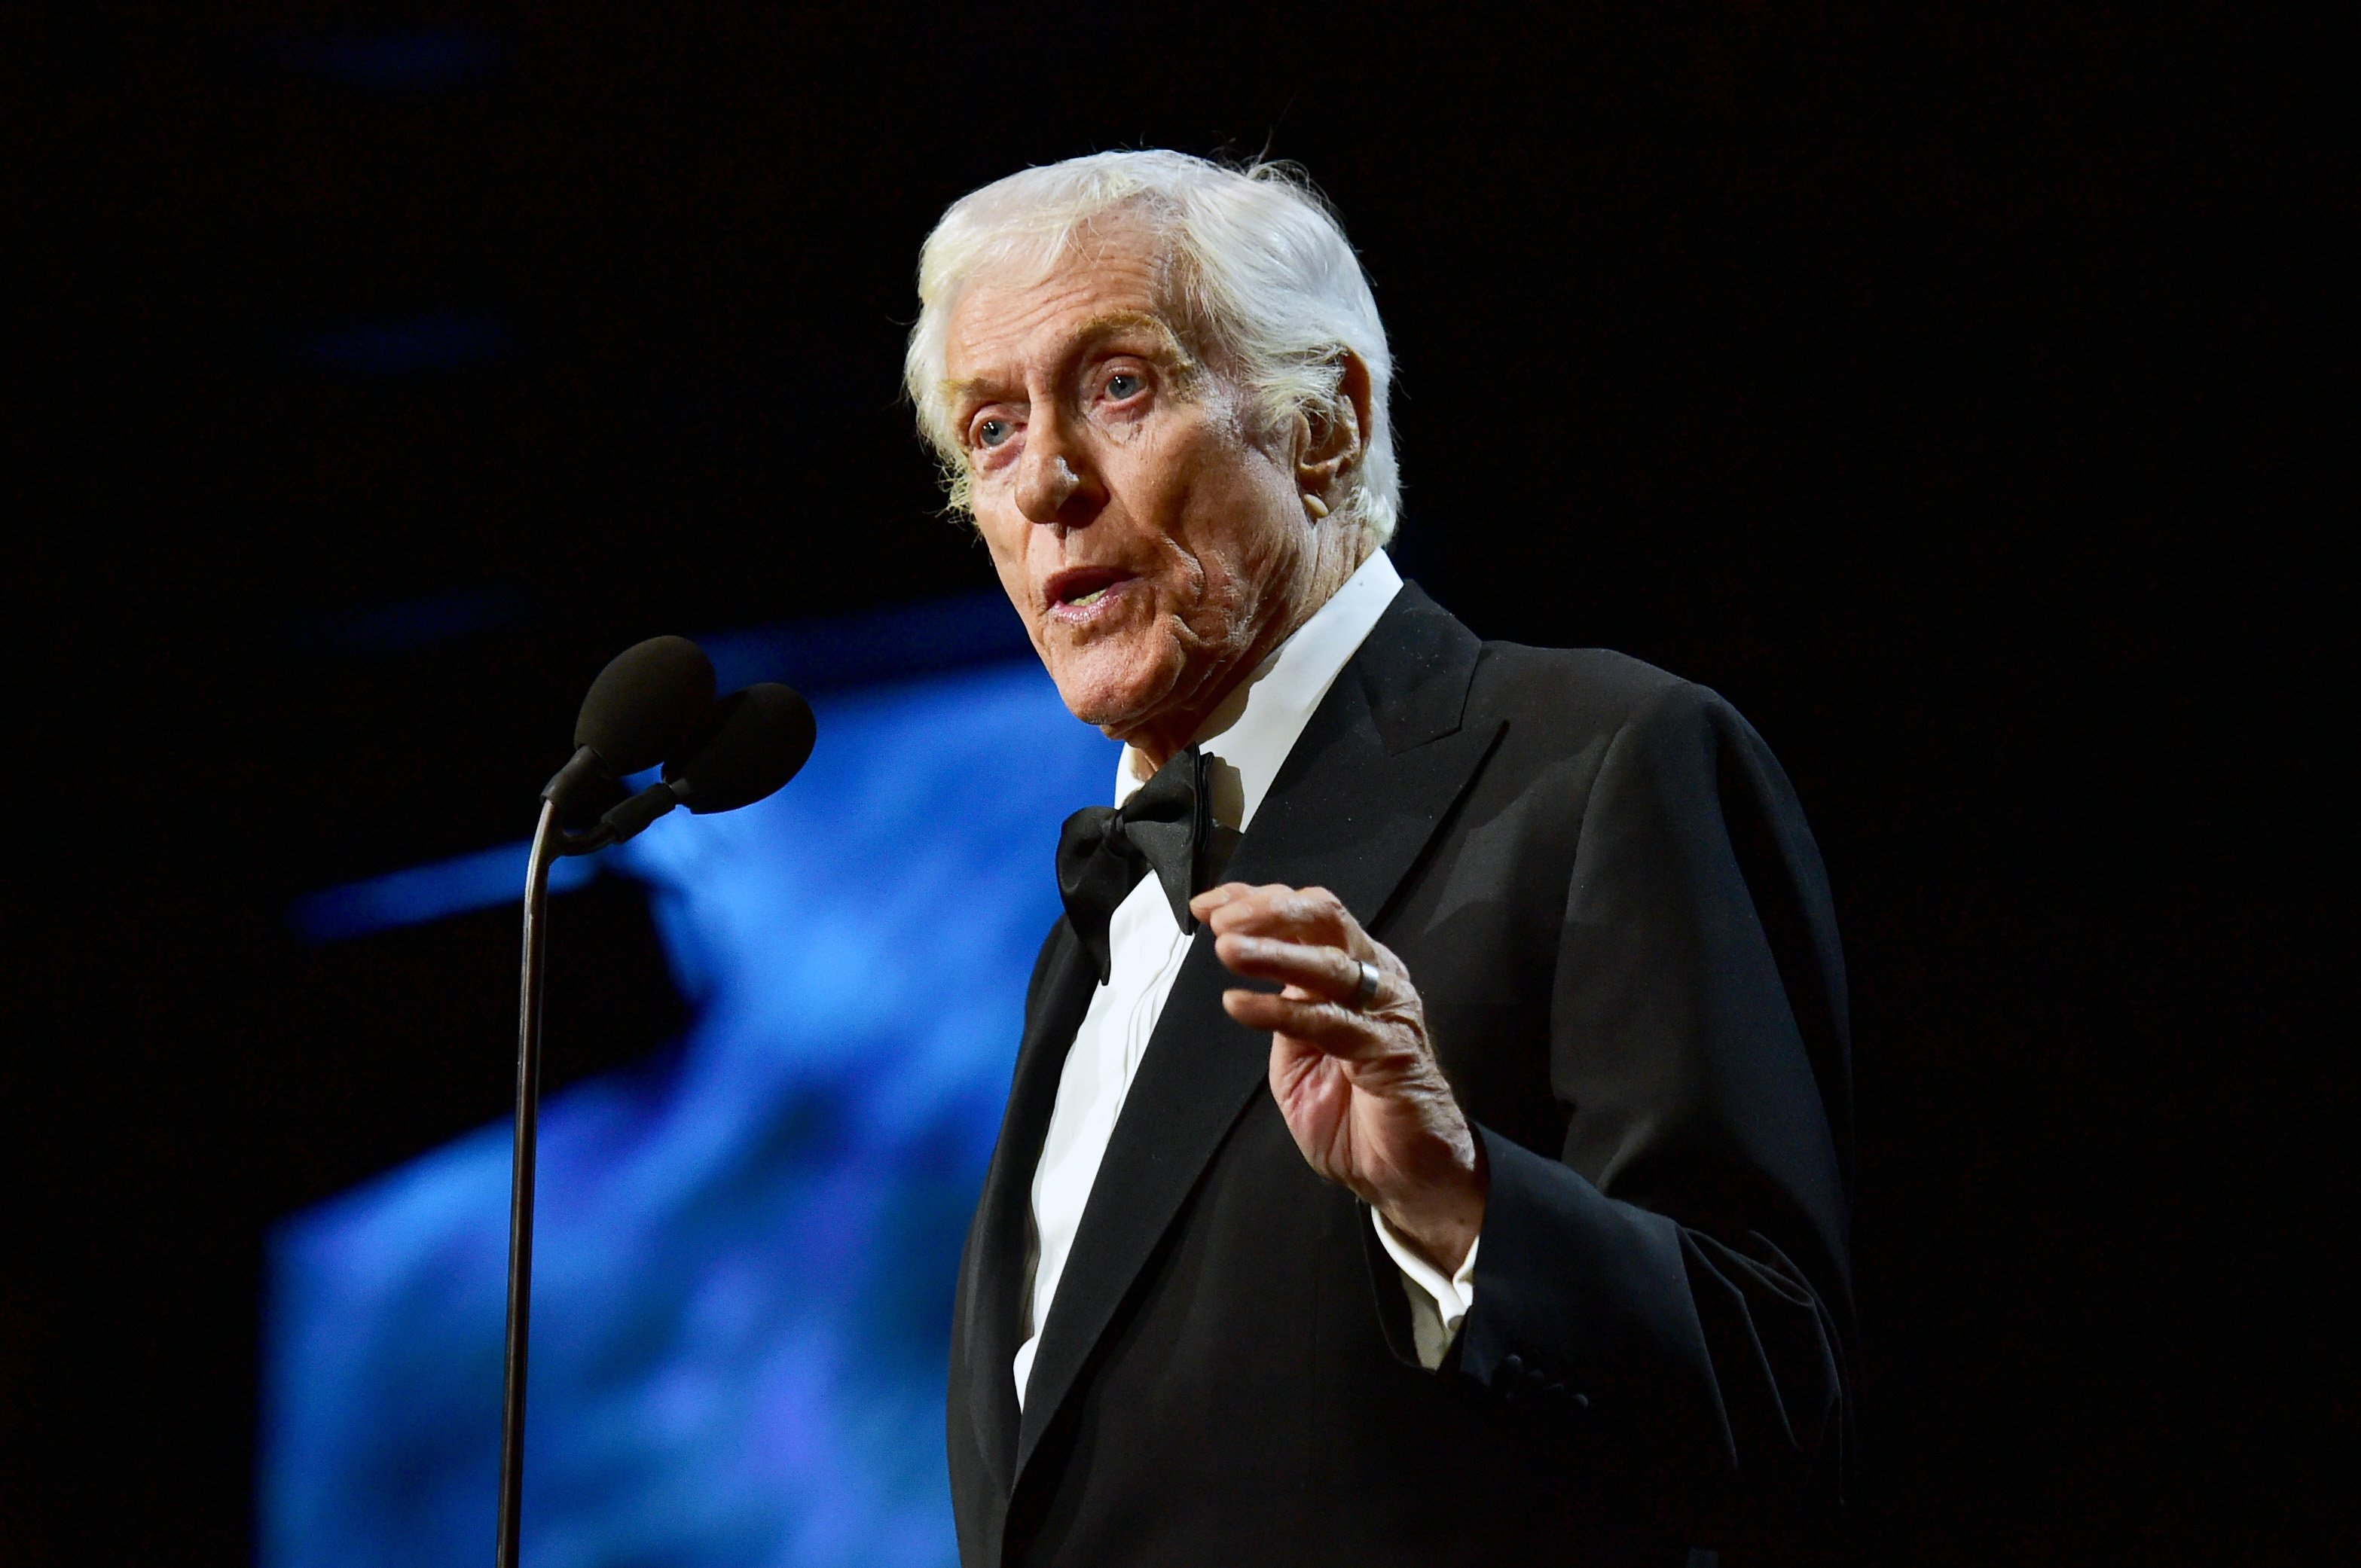 Dick Van Dyke accepts the Britannia Award for Excellence in Television onstage at the 2017 AMD British Academy Britannia Awards at The Beverly Hilton Hotel on October 27, 2017 in Beverly Hills, California | Photo: Getty Images